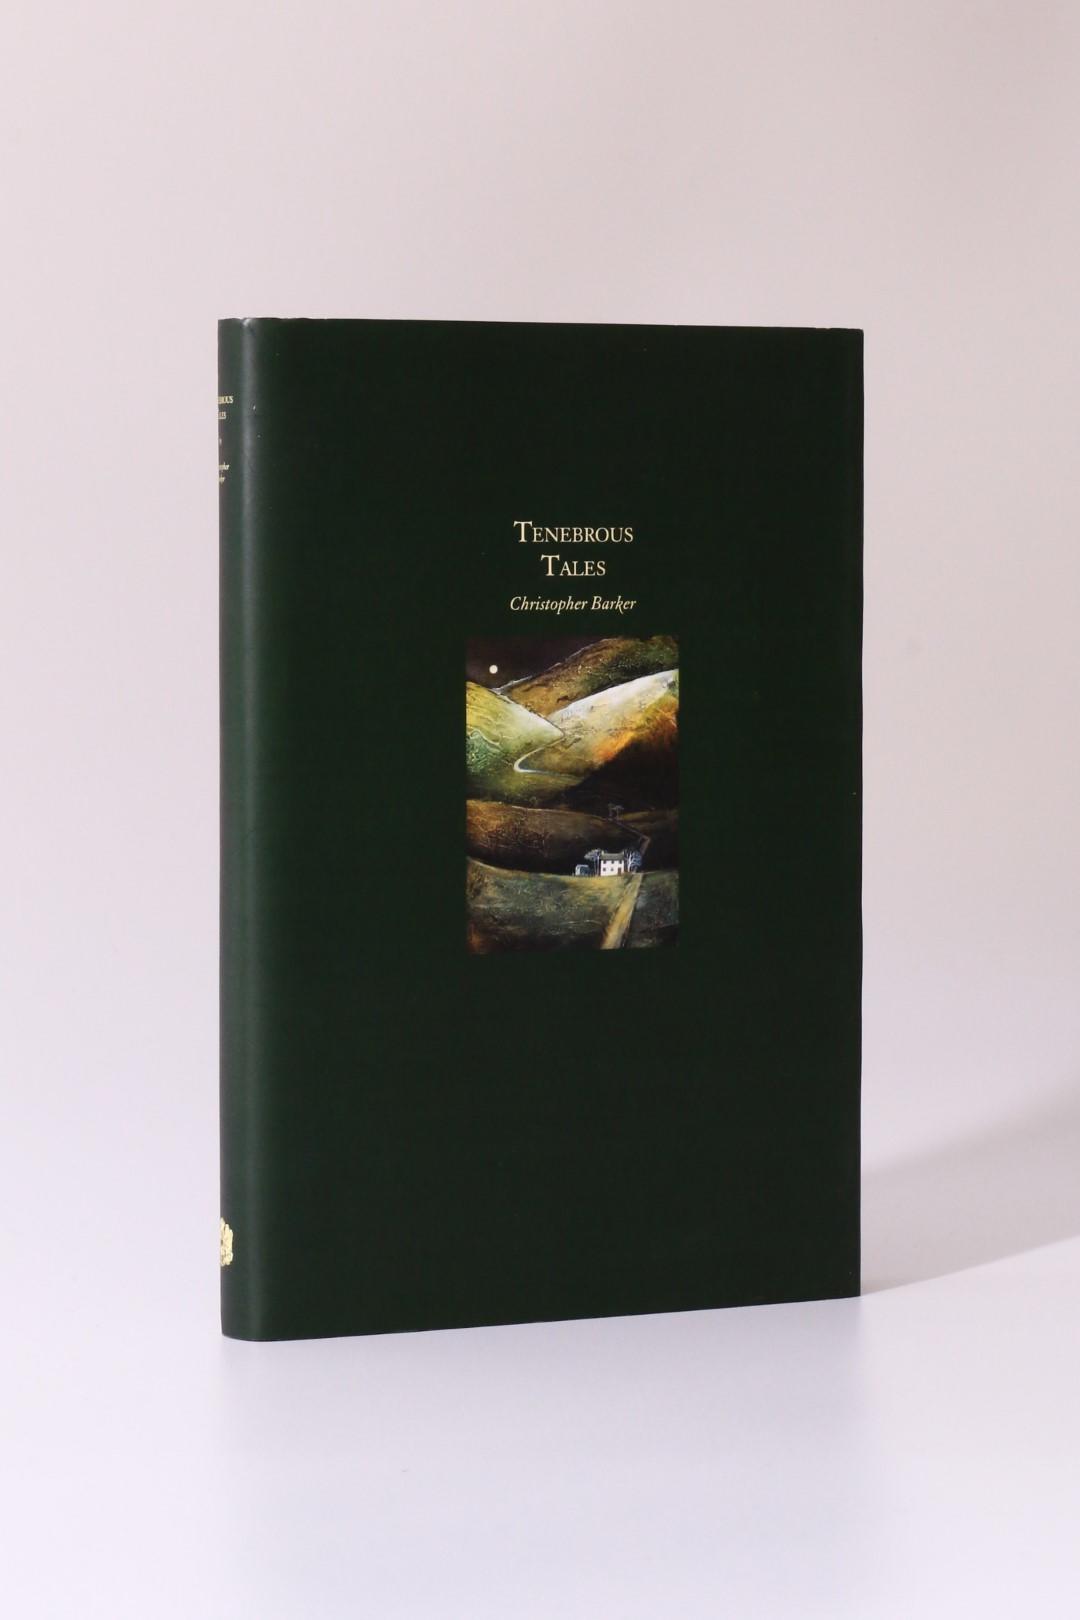 Christopher Barker - Tenebrous Tales - Ex-Occidente, 2010, Limited Edition.